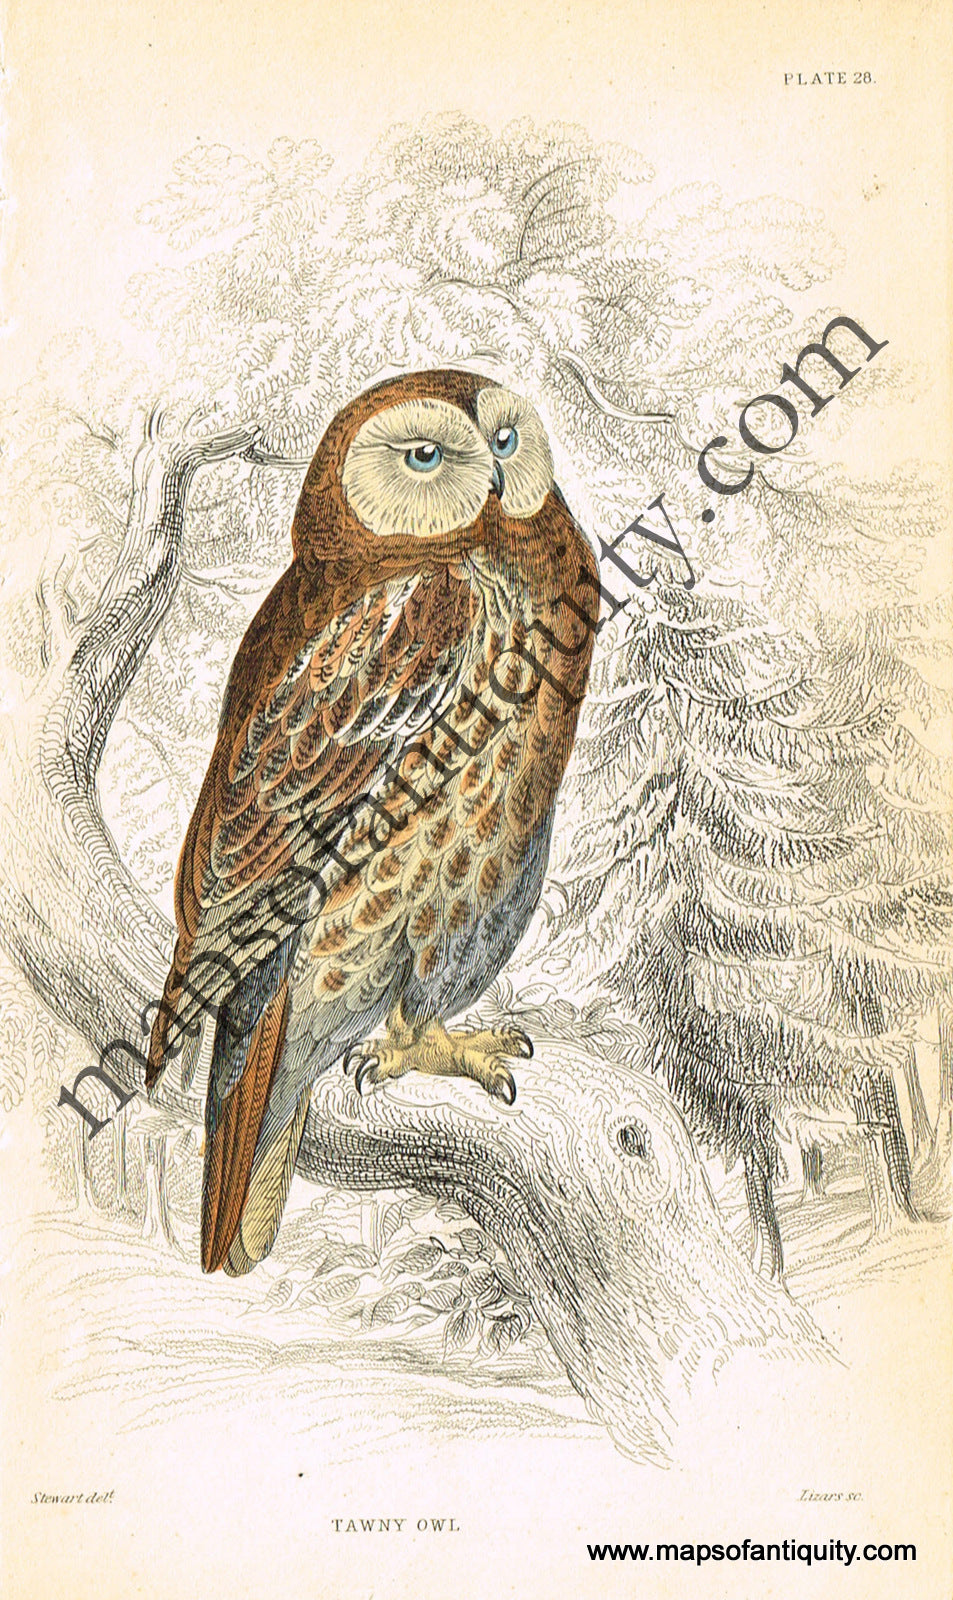 Antique-Hand-Colored-Engraved-Illustration-Tawny-Owl-Antique-Prints-Natural-History-Birds-1834-Jardine-Maps-Of-Antiquity